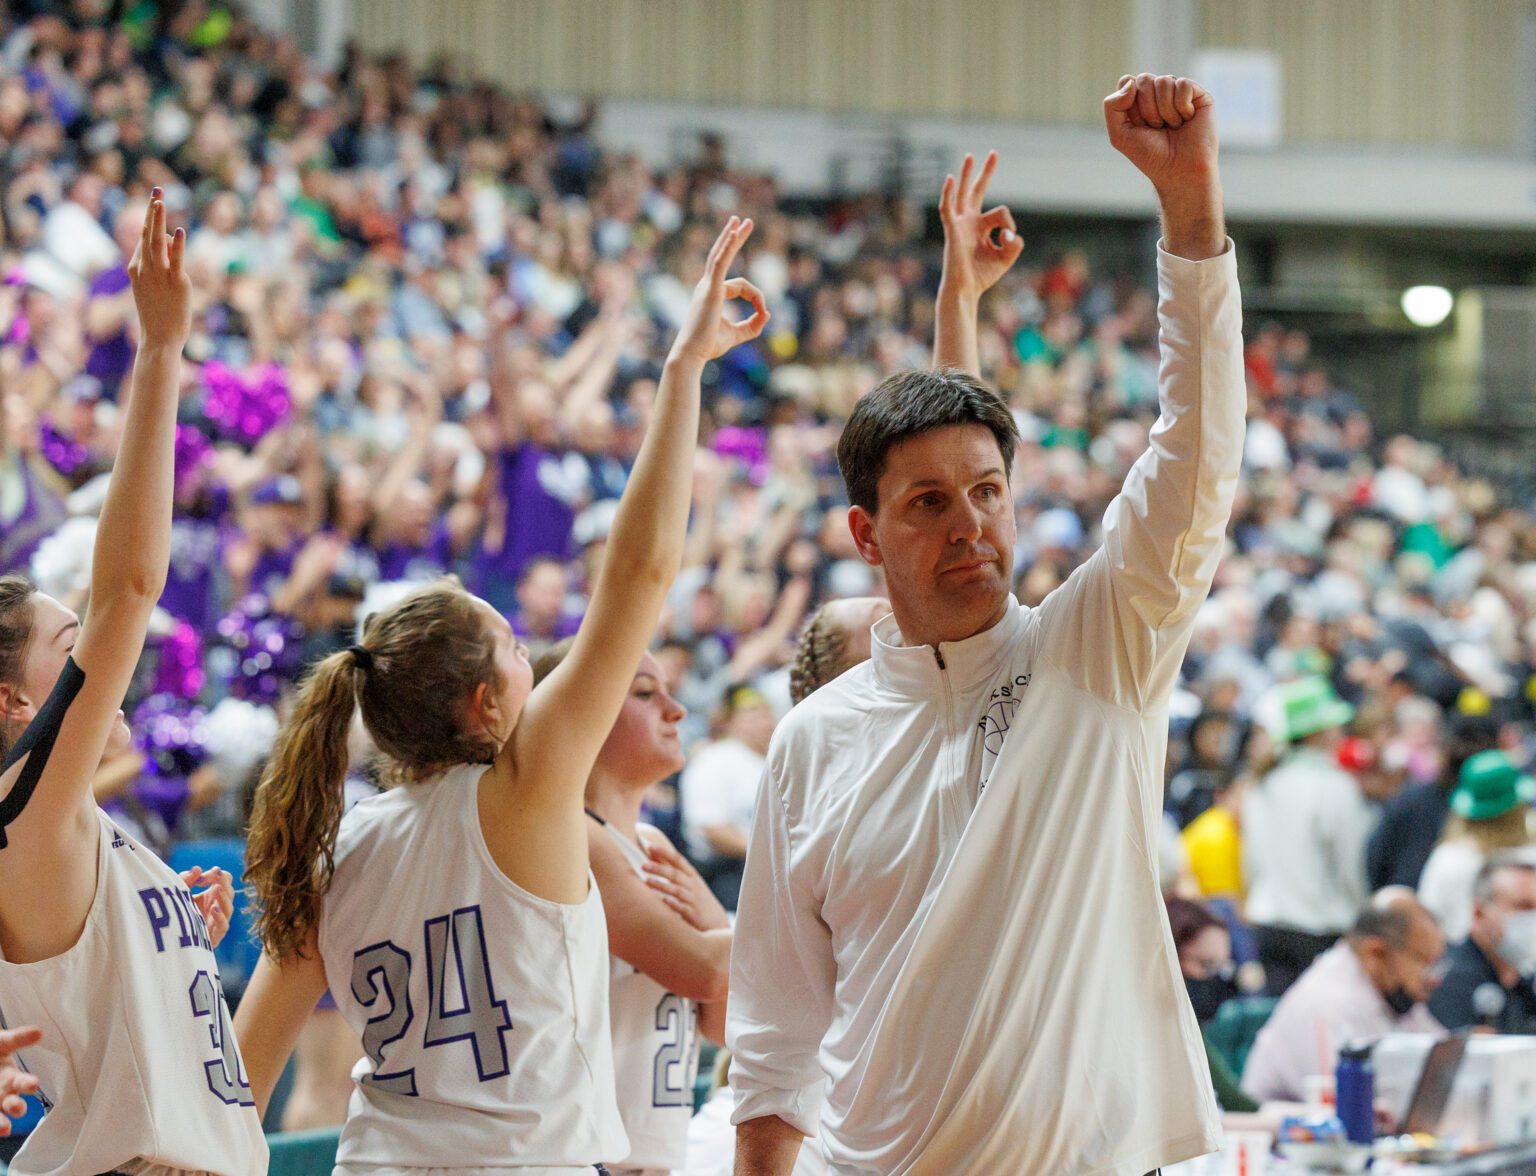 Nooksack Valley head girls basketball coach Shane Wichers holds up a fist after a player makes a 3-pointer in a state quarterfinal game versus Wapato on March 3.